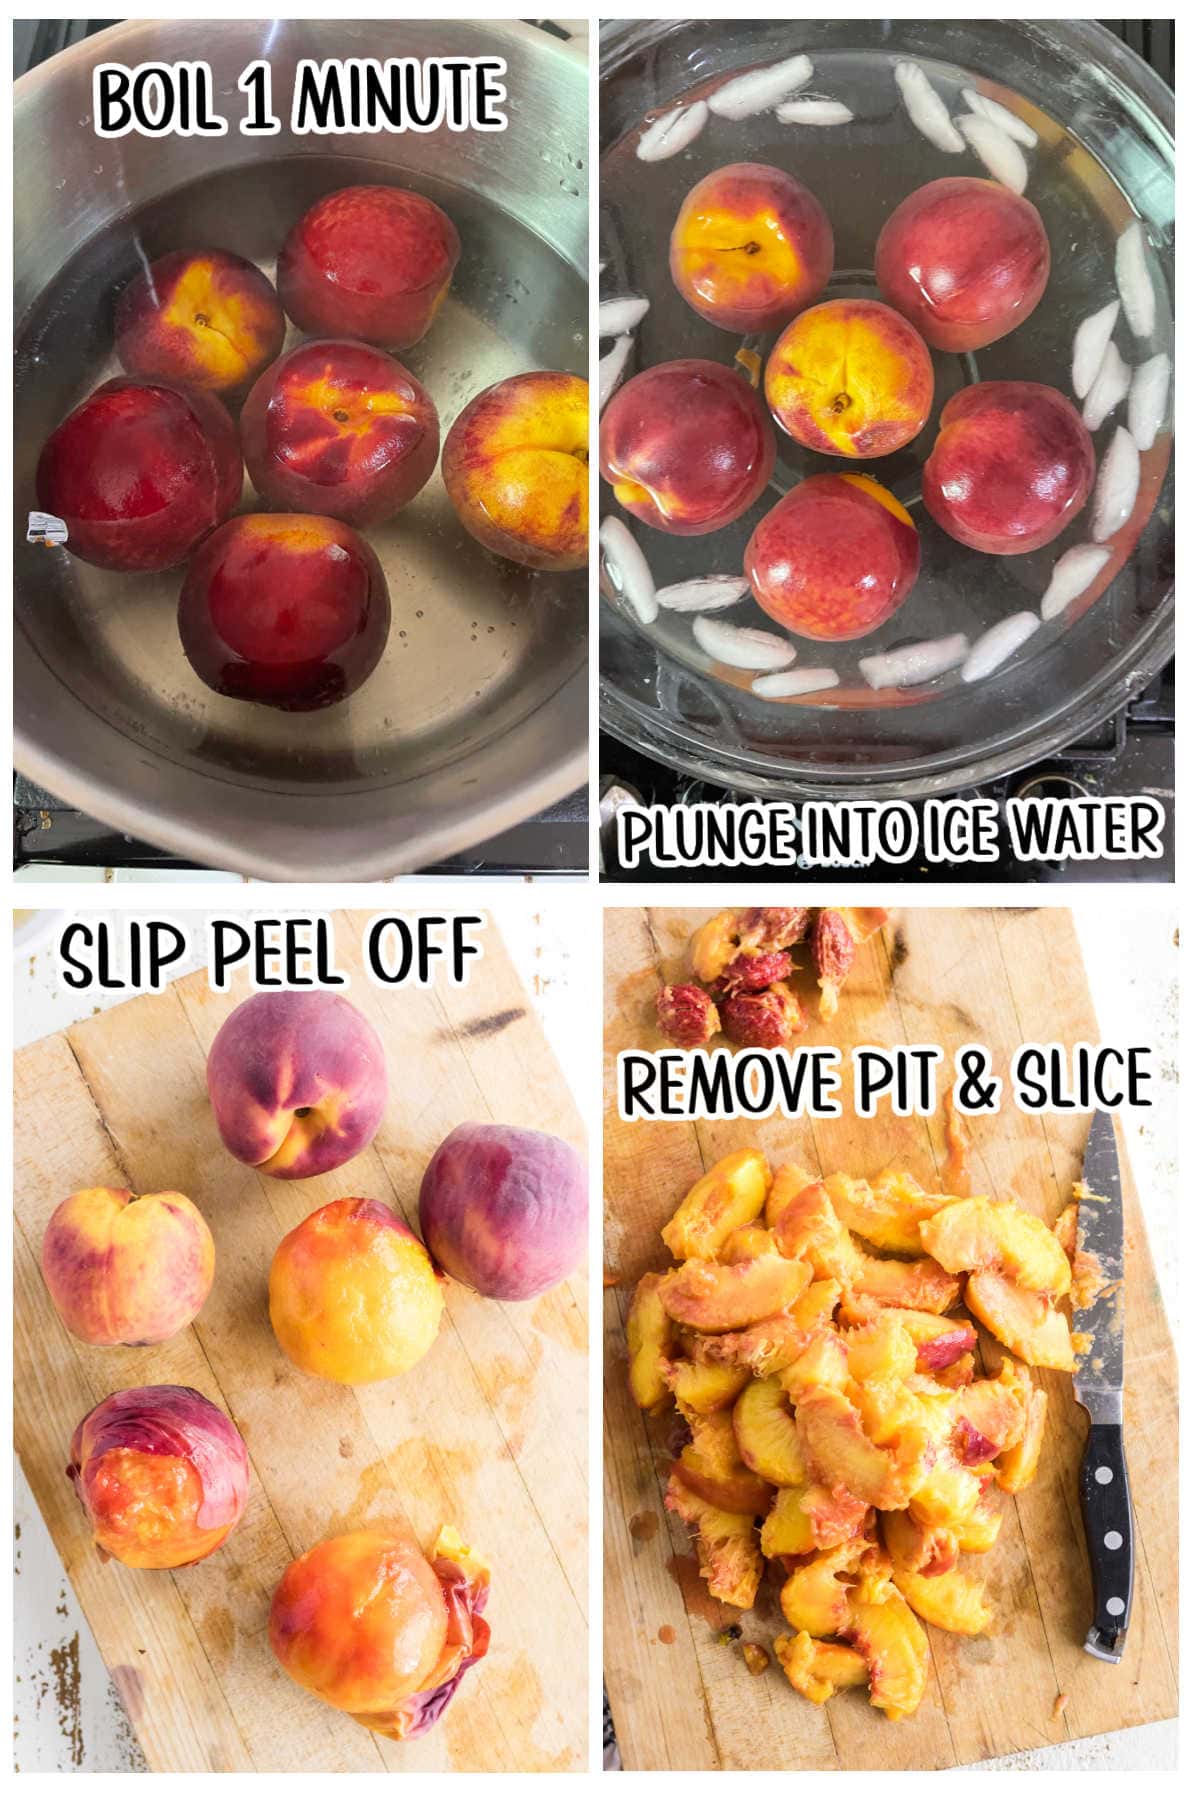 Step by step images showing how to remove peels from peaches using a hot water bath.